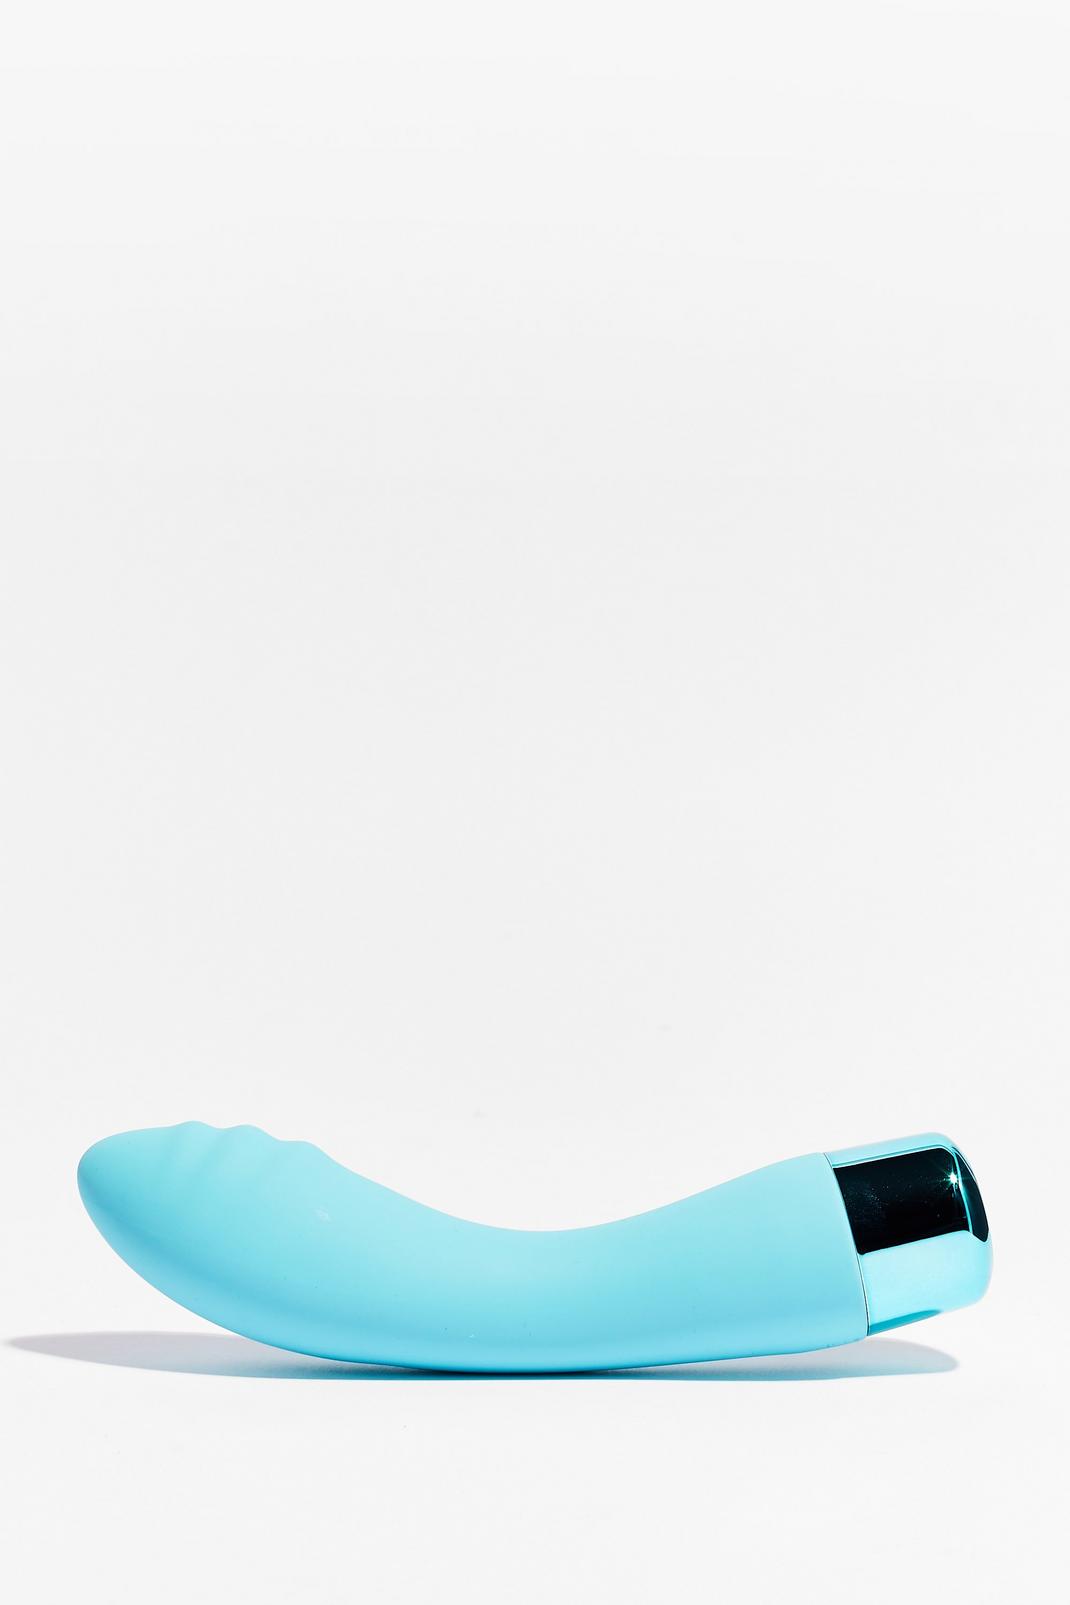 106 Ribbed Silicone 10 Functions Vibrator image number 1